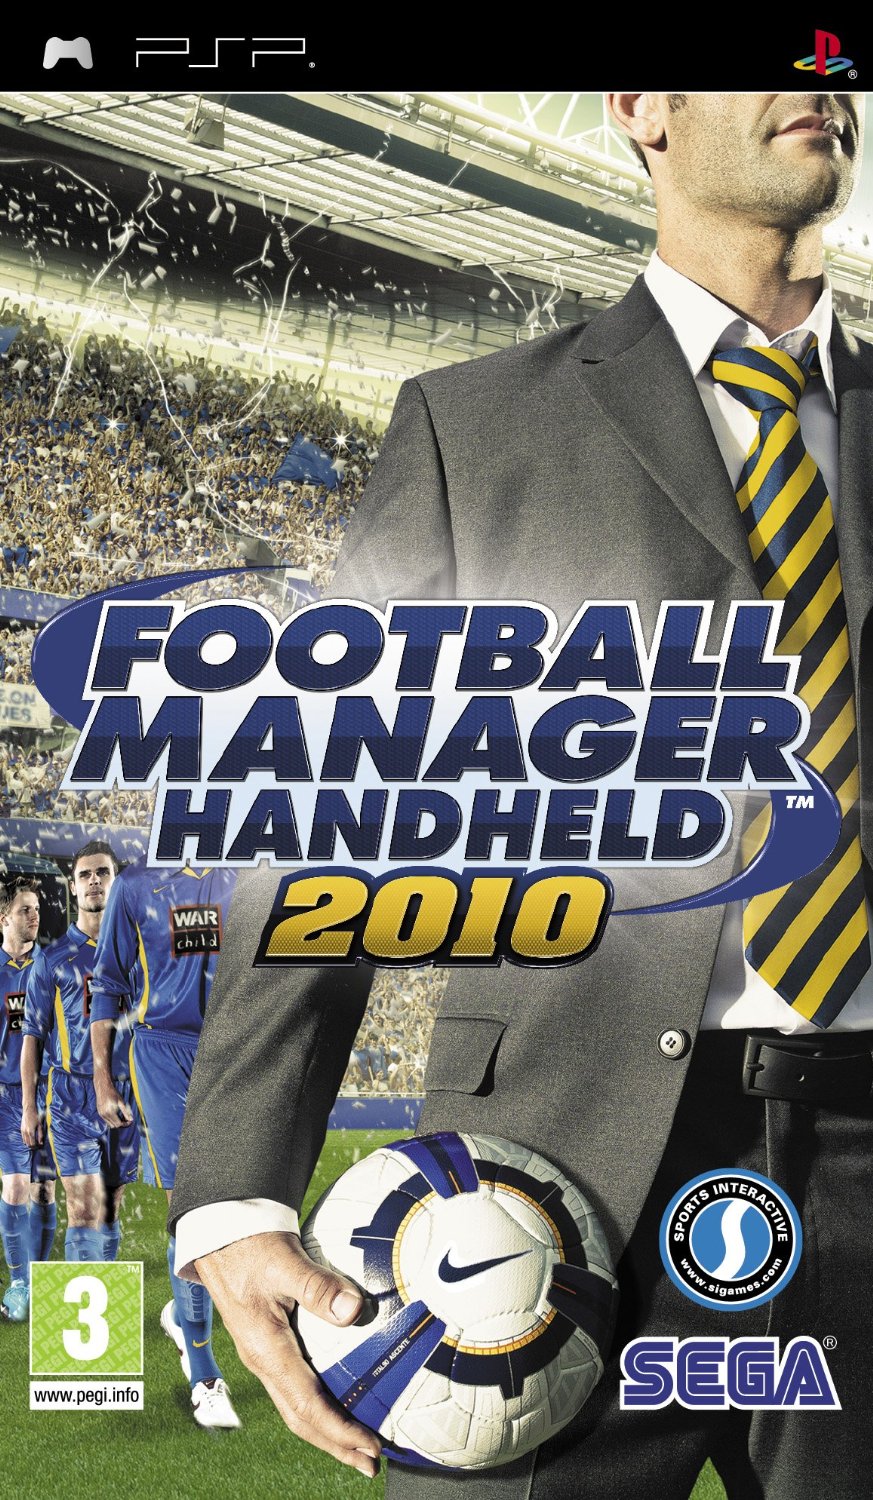 Football Manager Hndheld 2010